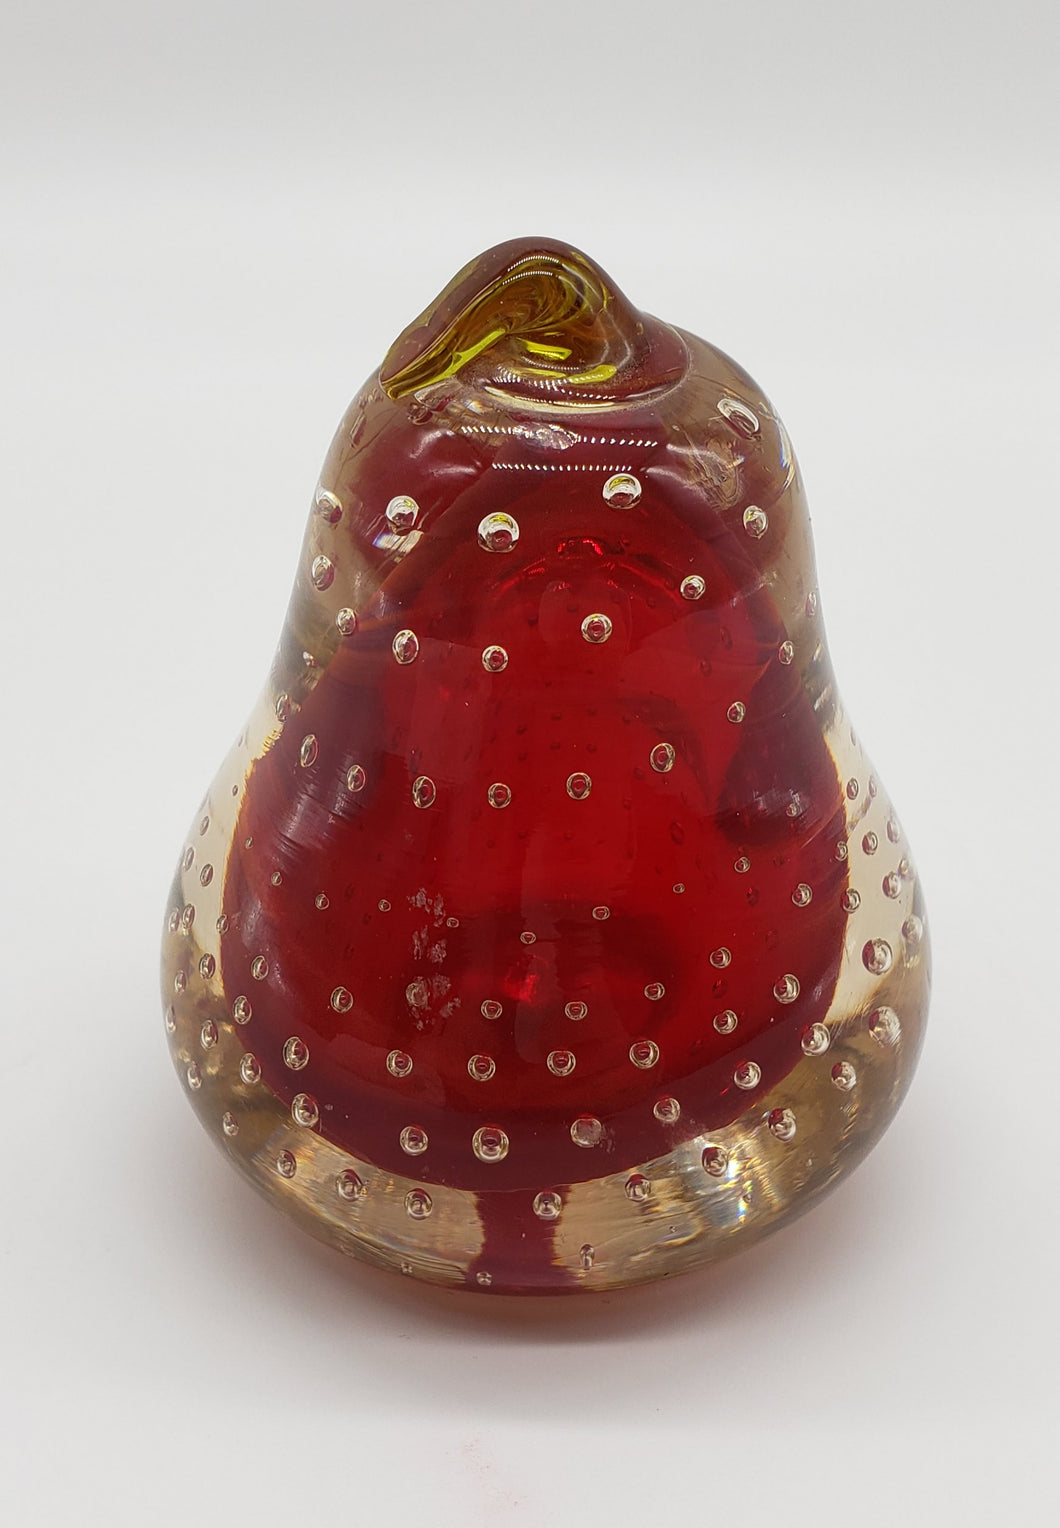 Blown Glass Red Pear Paperweight with Controlled Bubbles